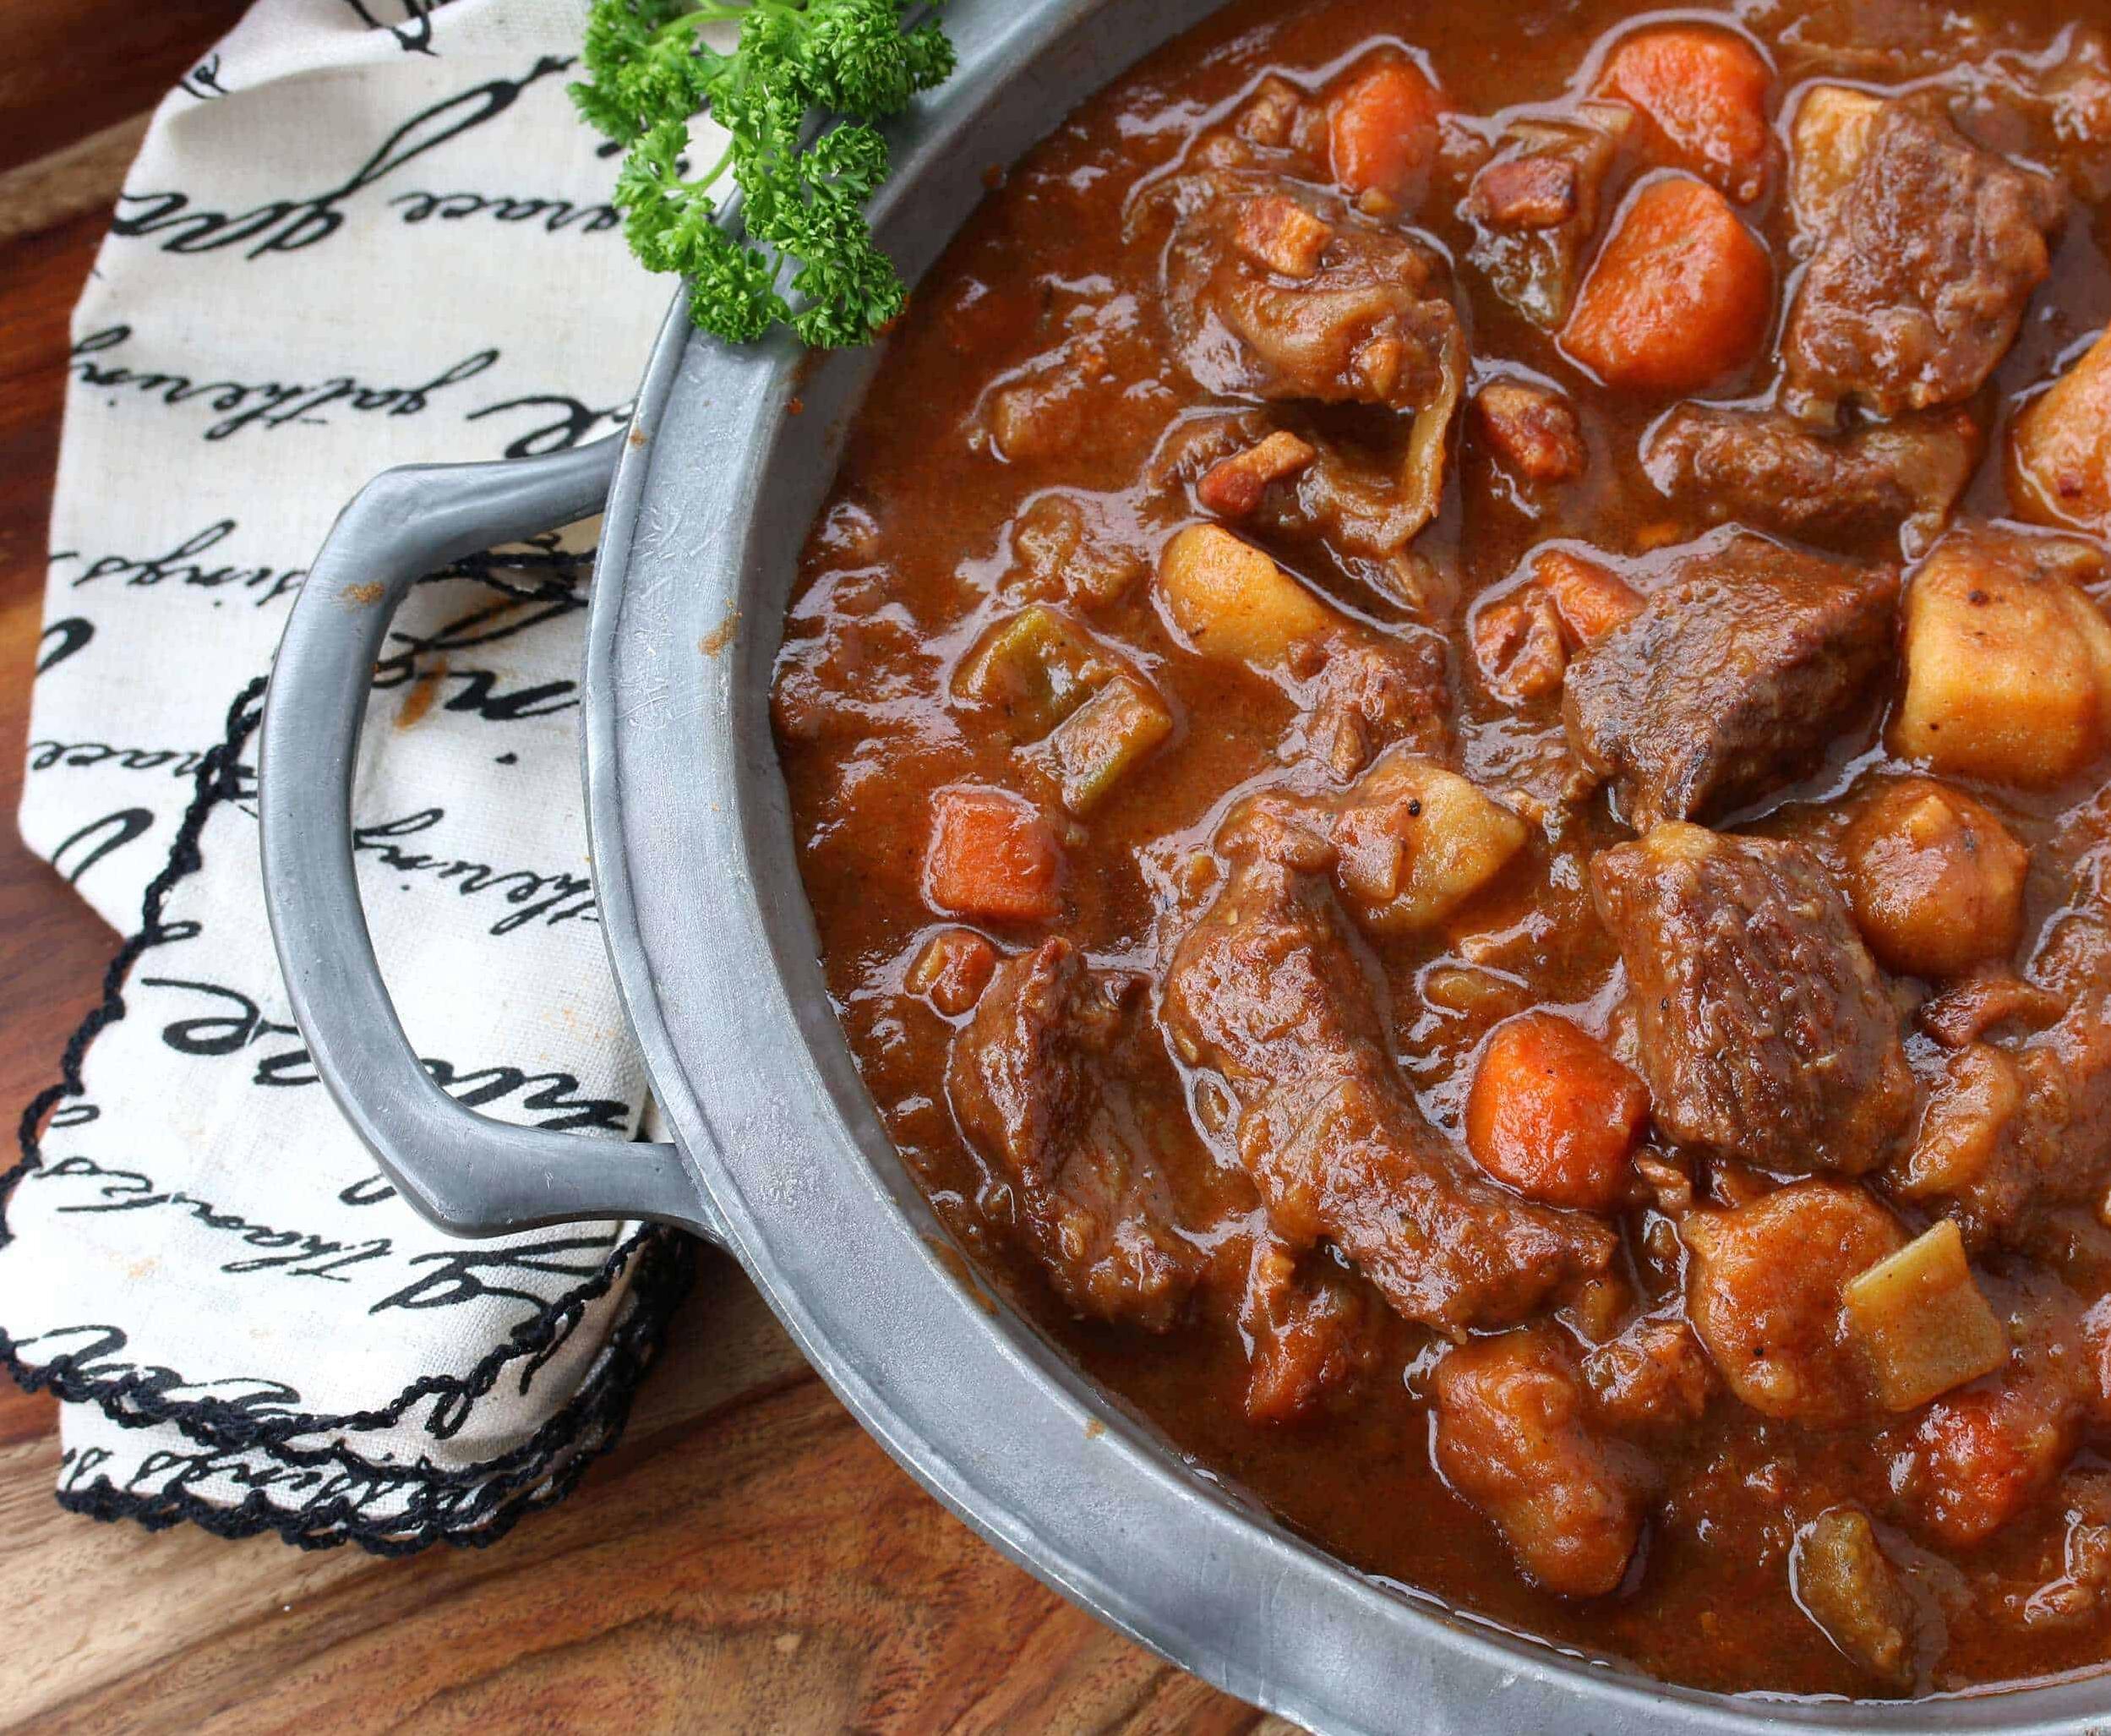  This stew is even better the day after, as the flavors continue to meld